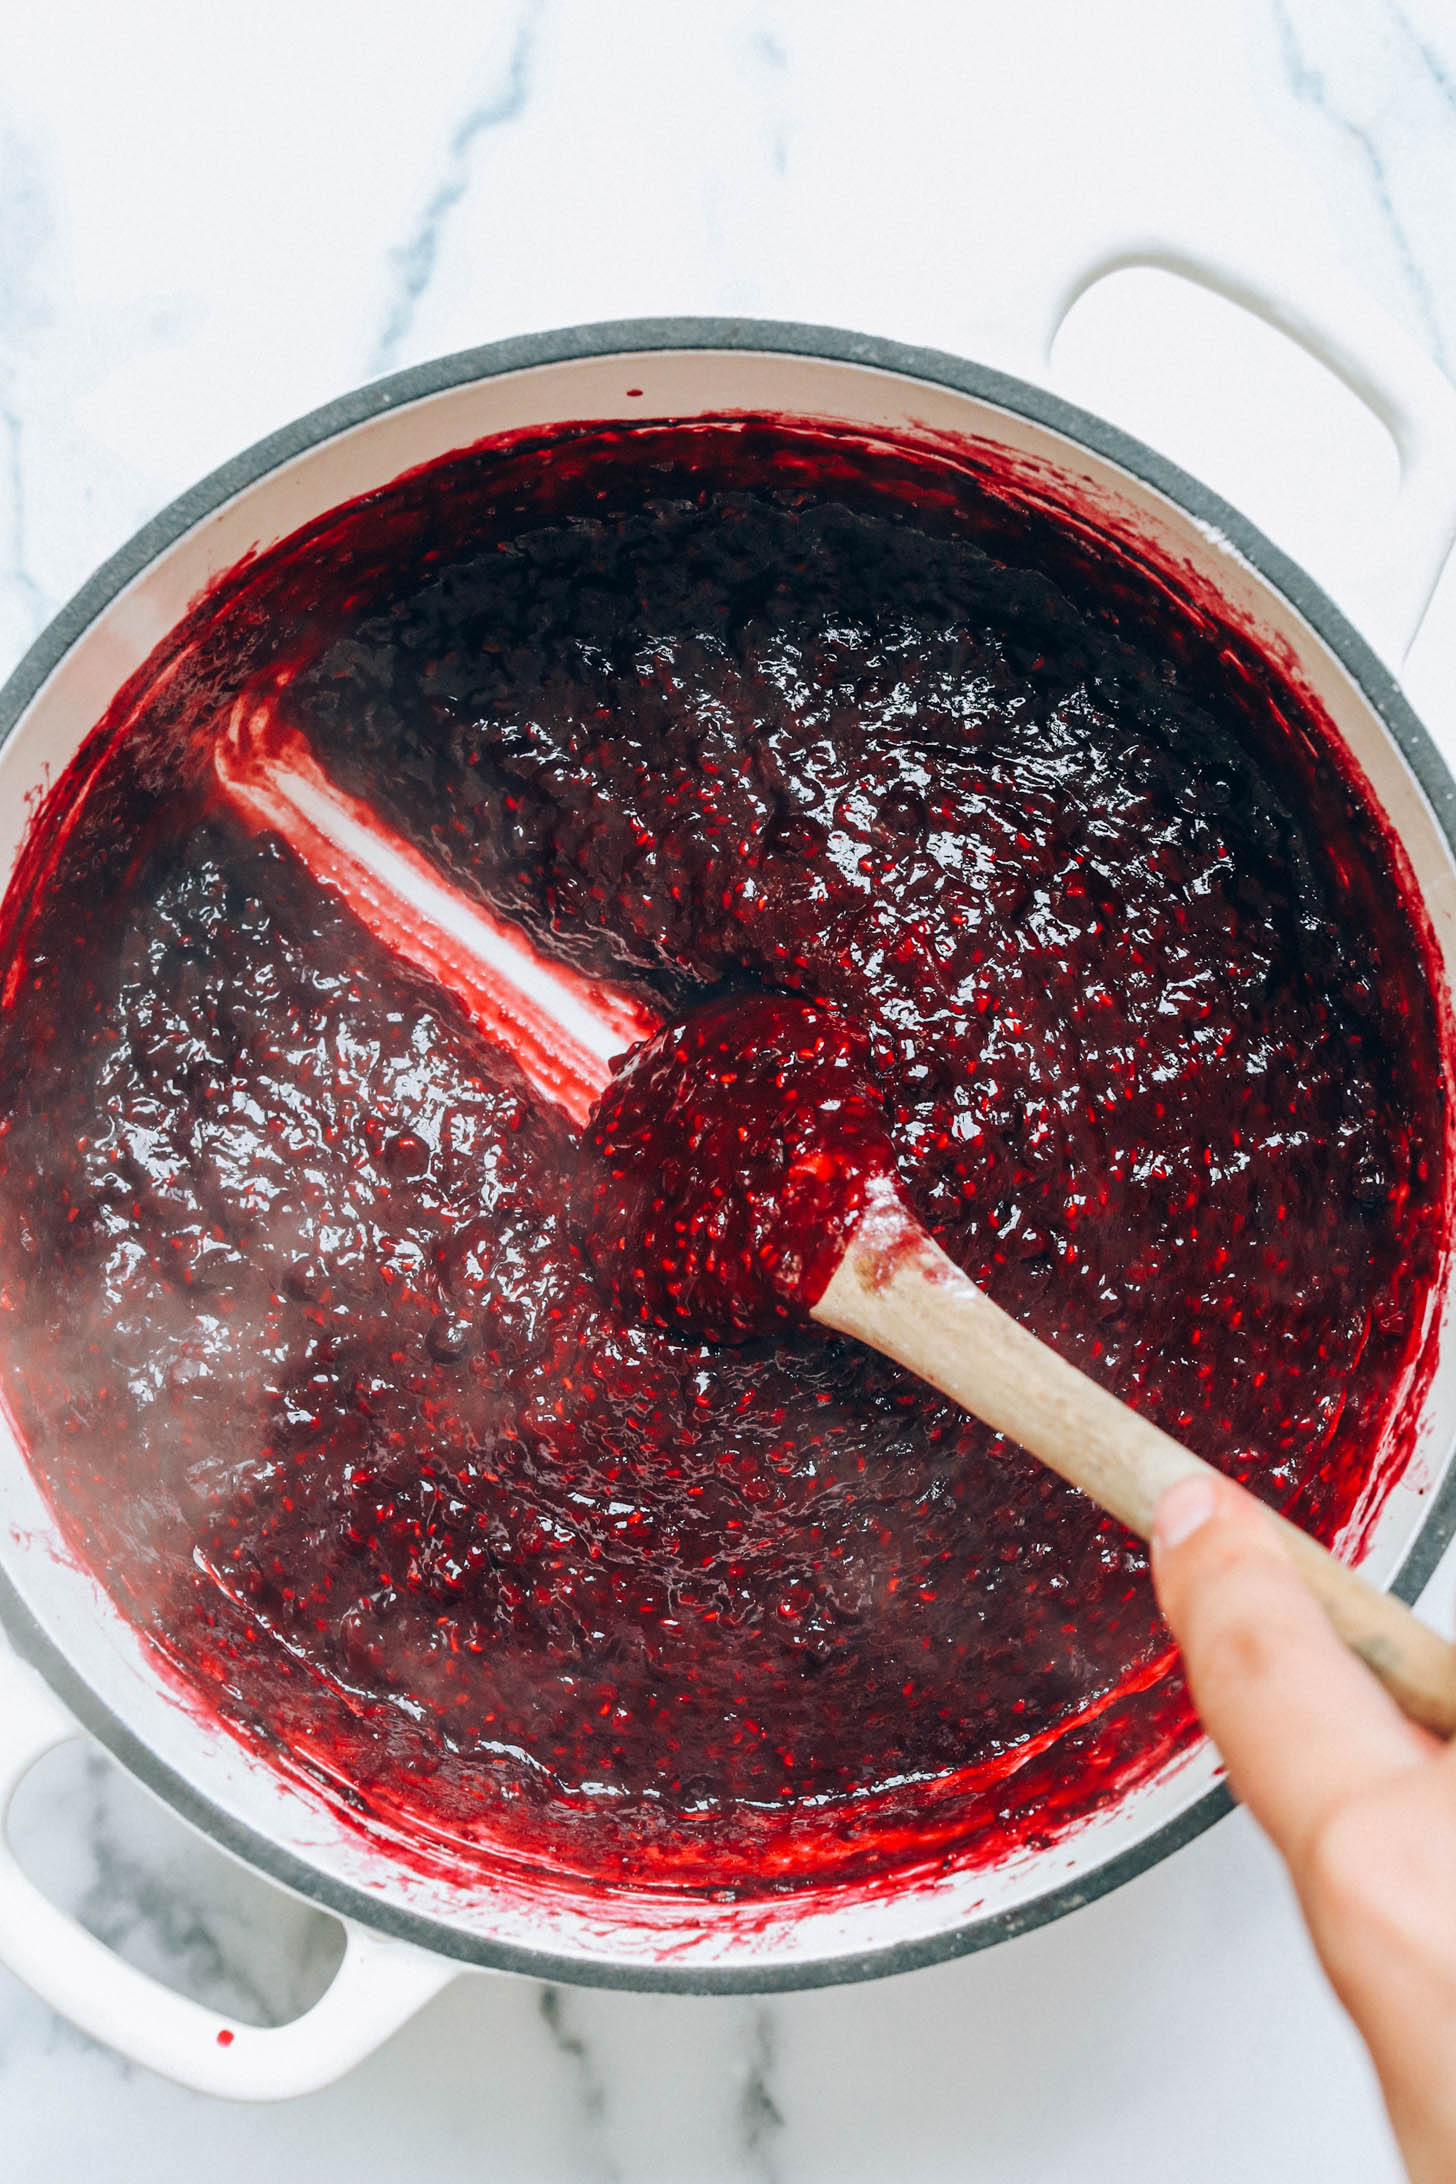 Scraping a spoon across the bottom of a pan to show the thickness of the mixed berry filling